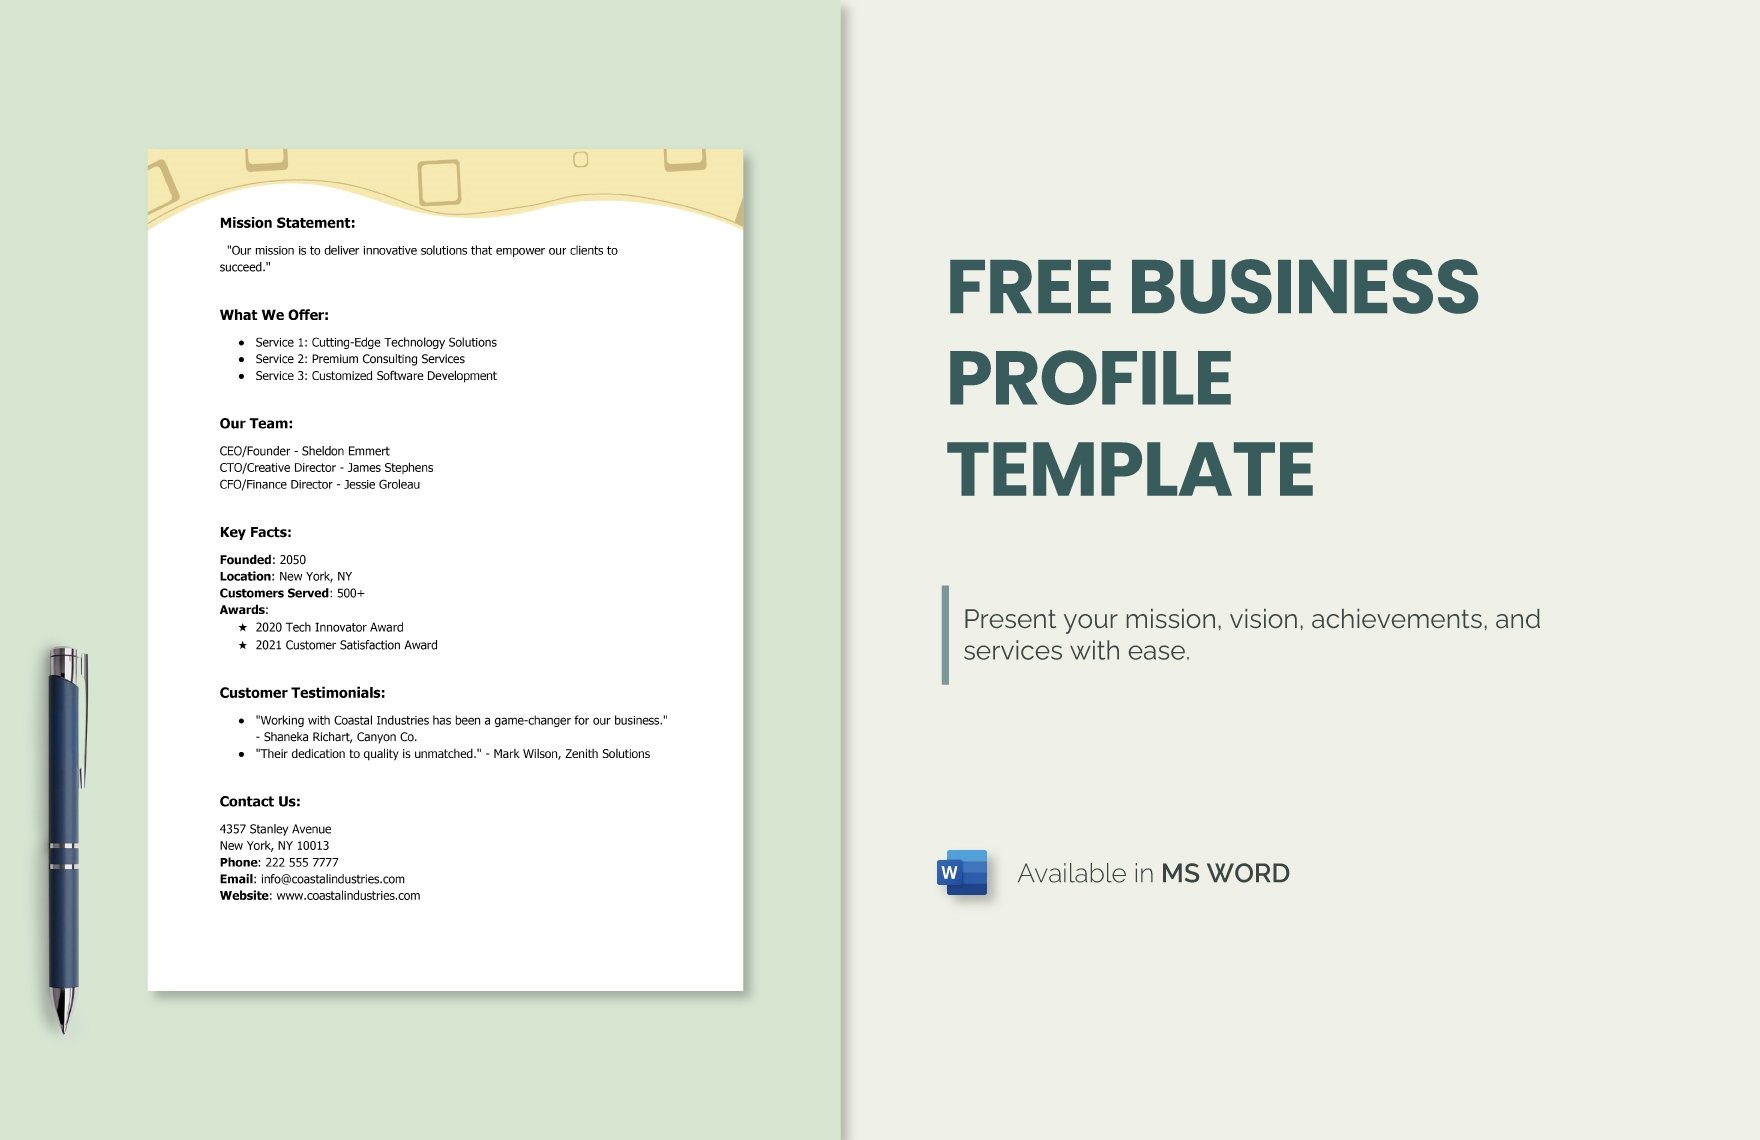 Free Business Profile Template in Word